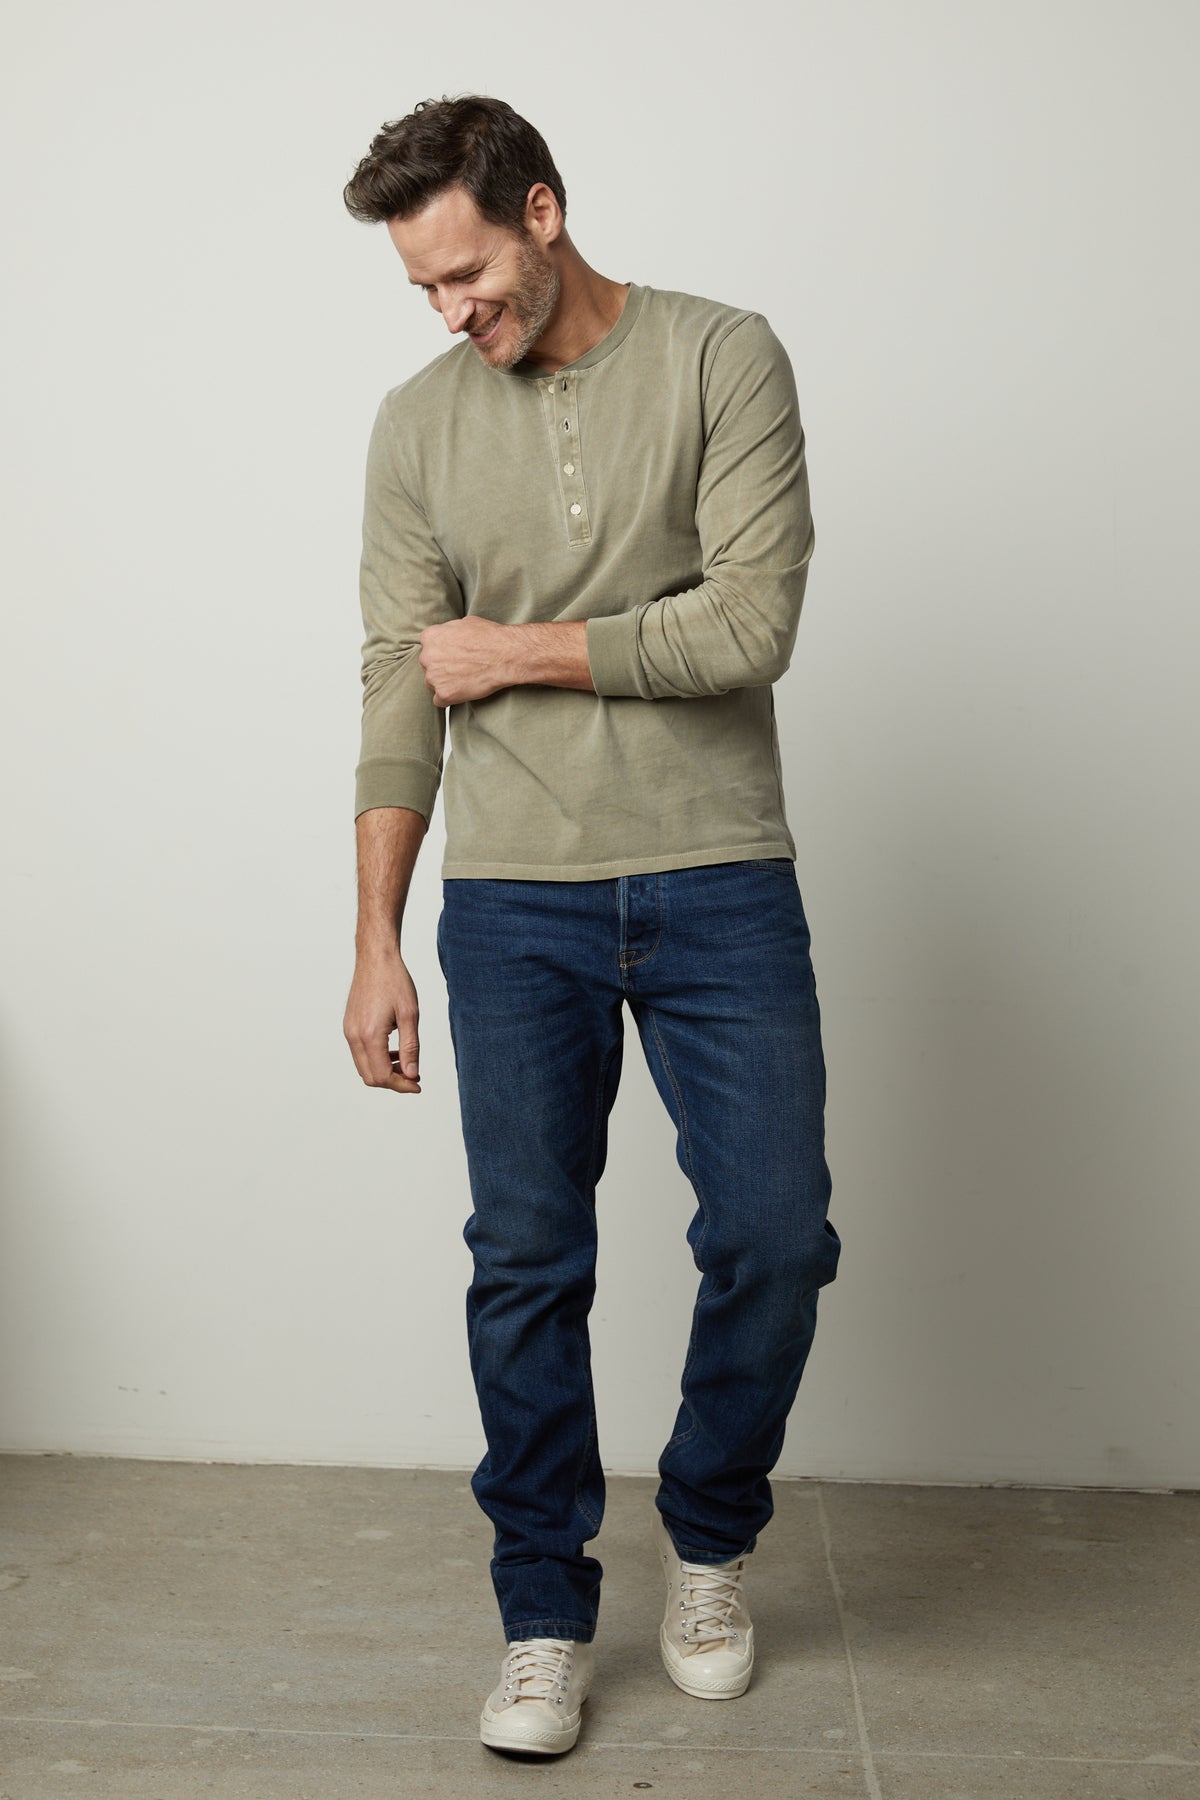 A man wearing REMI HENLEY jeans and a long-sleeved shirt by Velvet by Graham & Spencer.-26827678056641